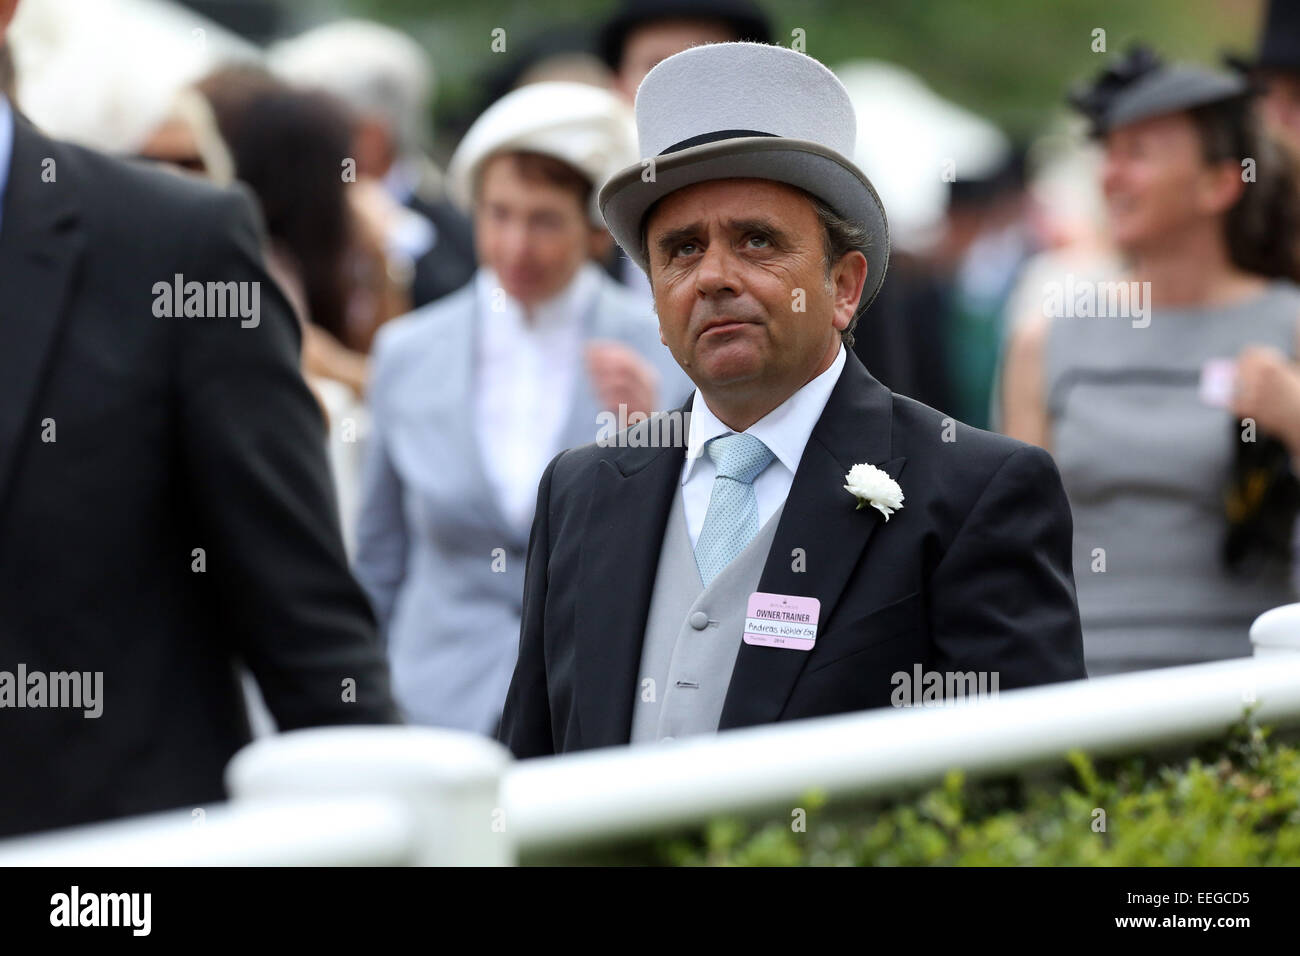 Royal Ascot, Portrait of German coach Andreas Woehler Stock Photo